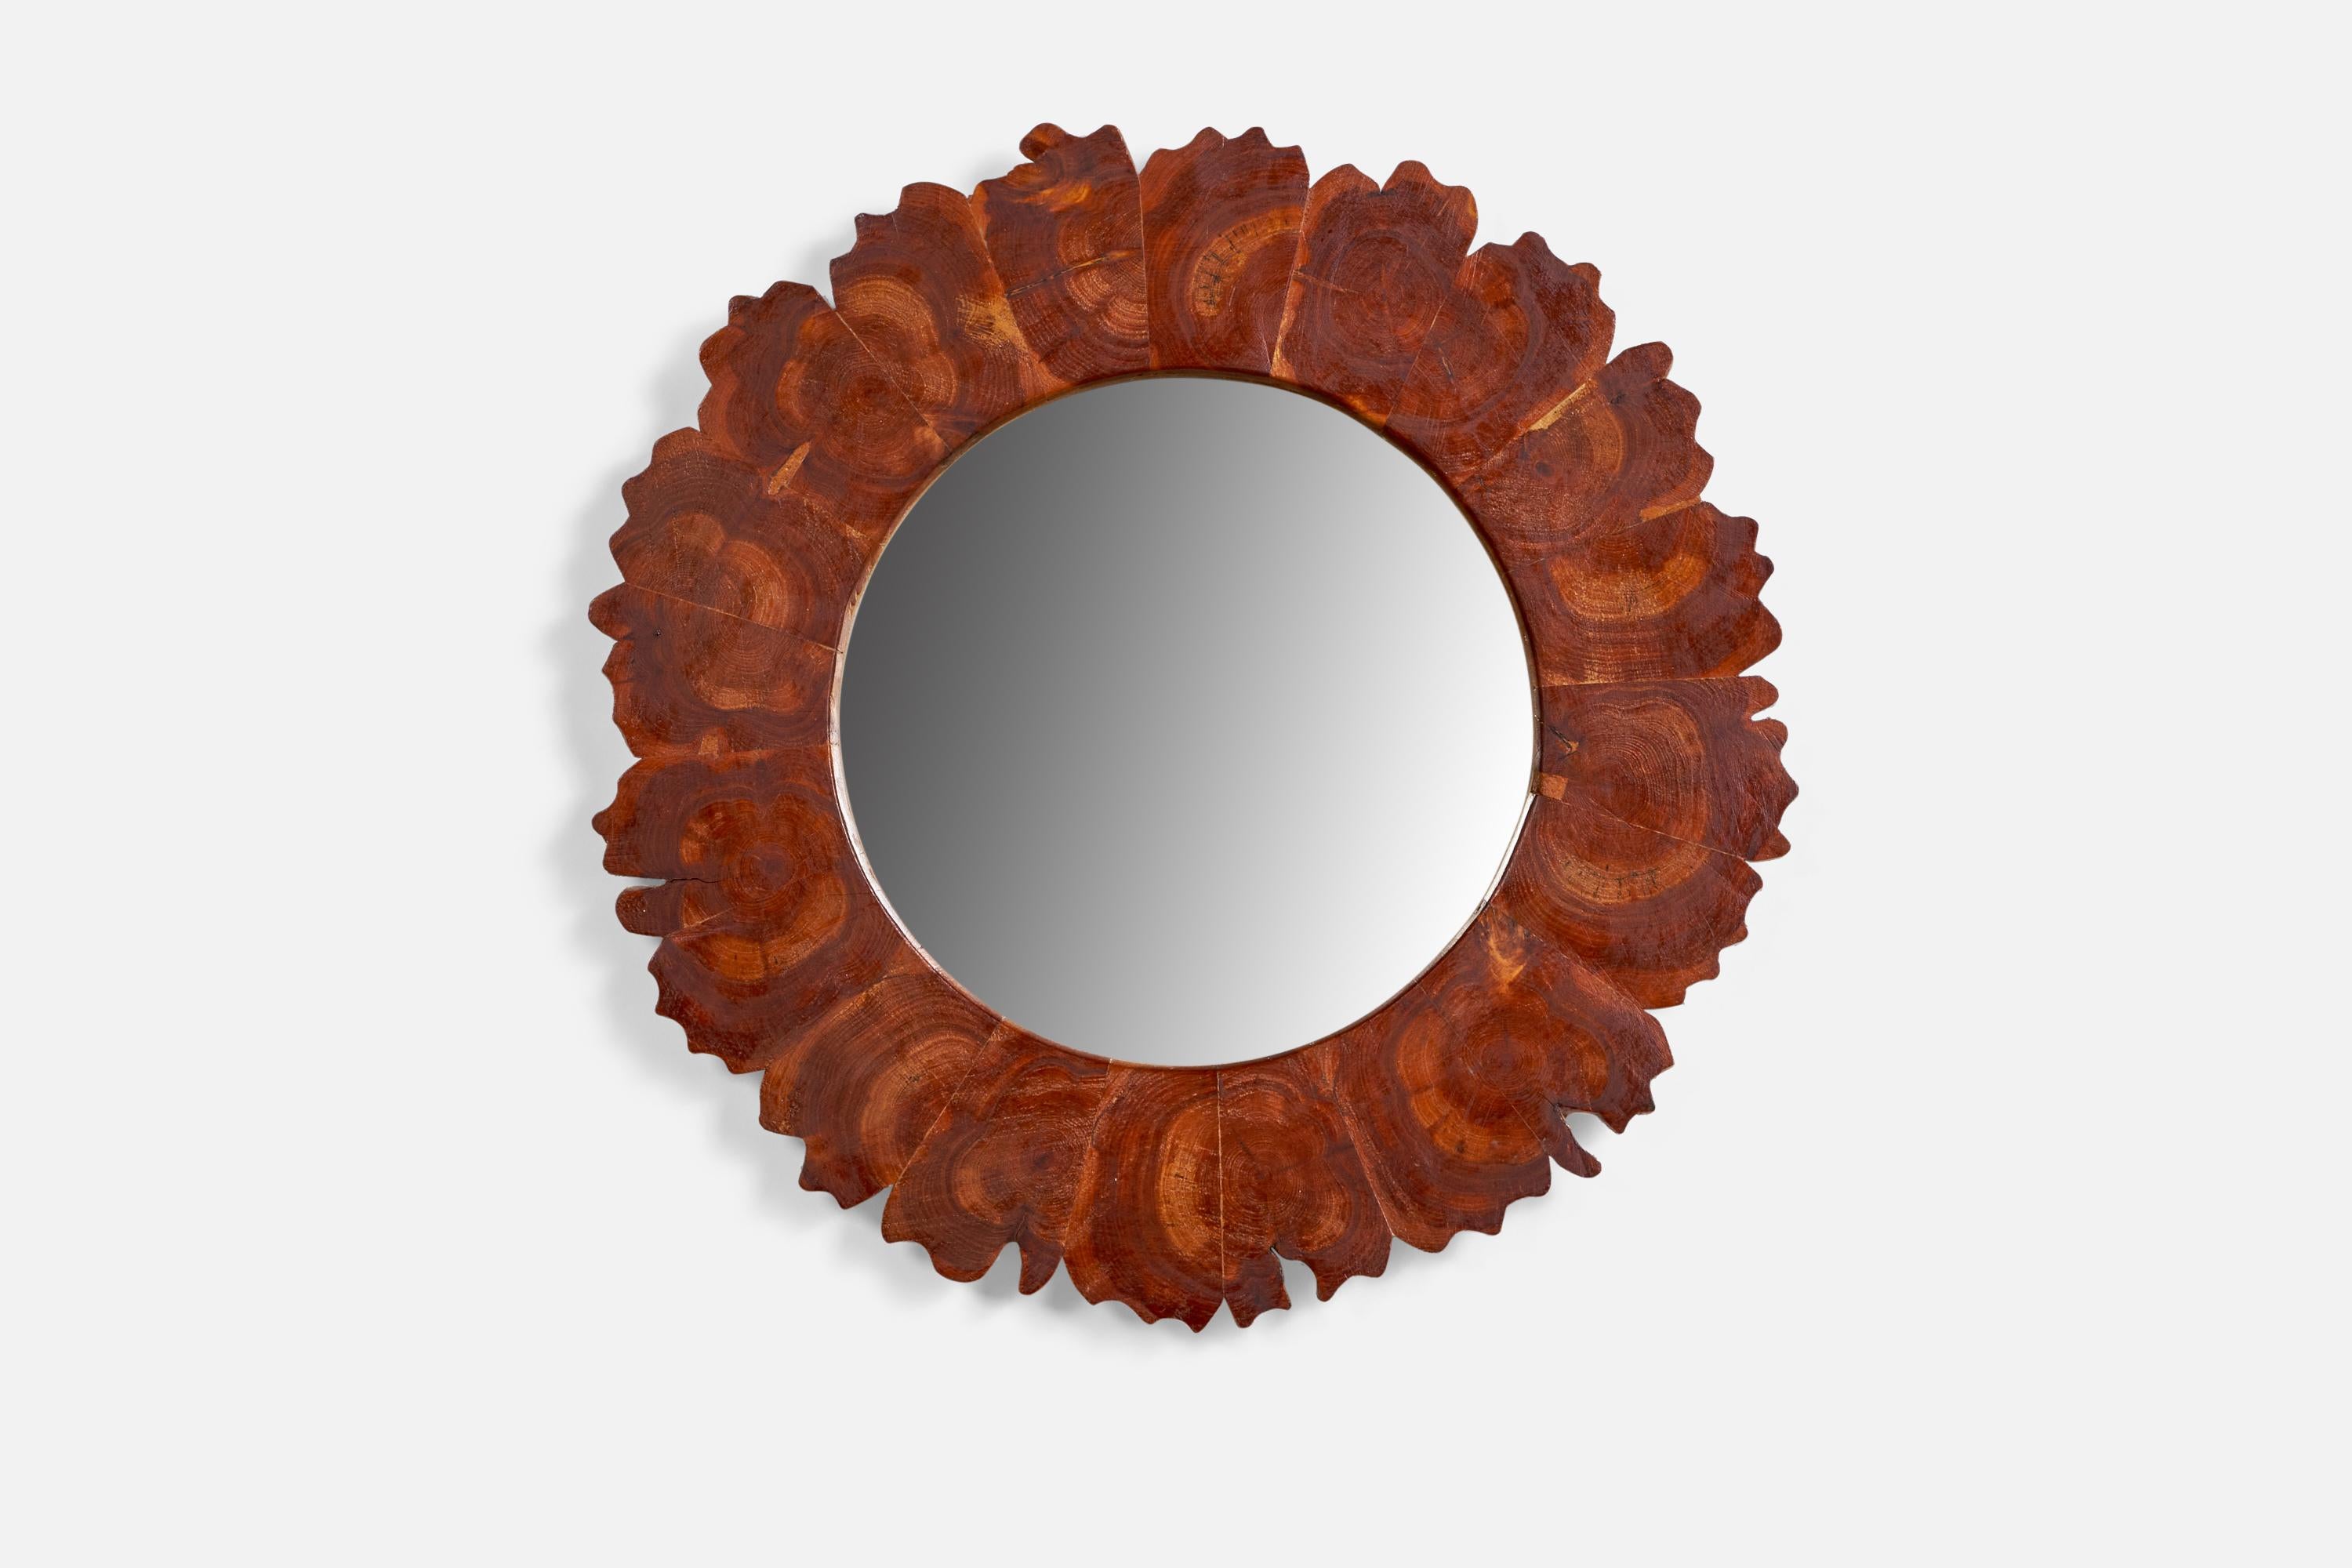 A stained wood mirror designed and produced in Sweden, 1960s.